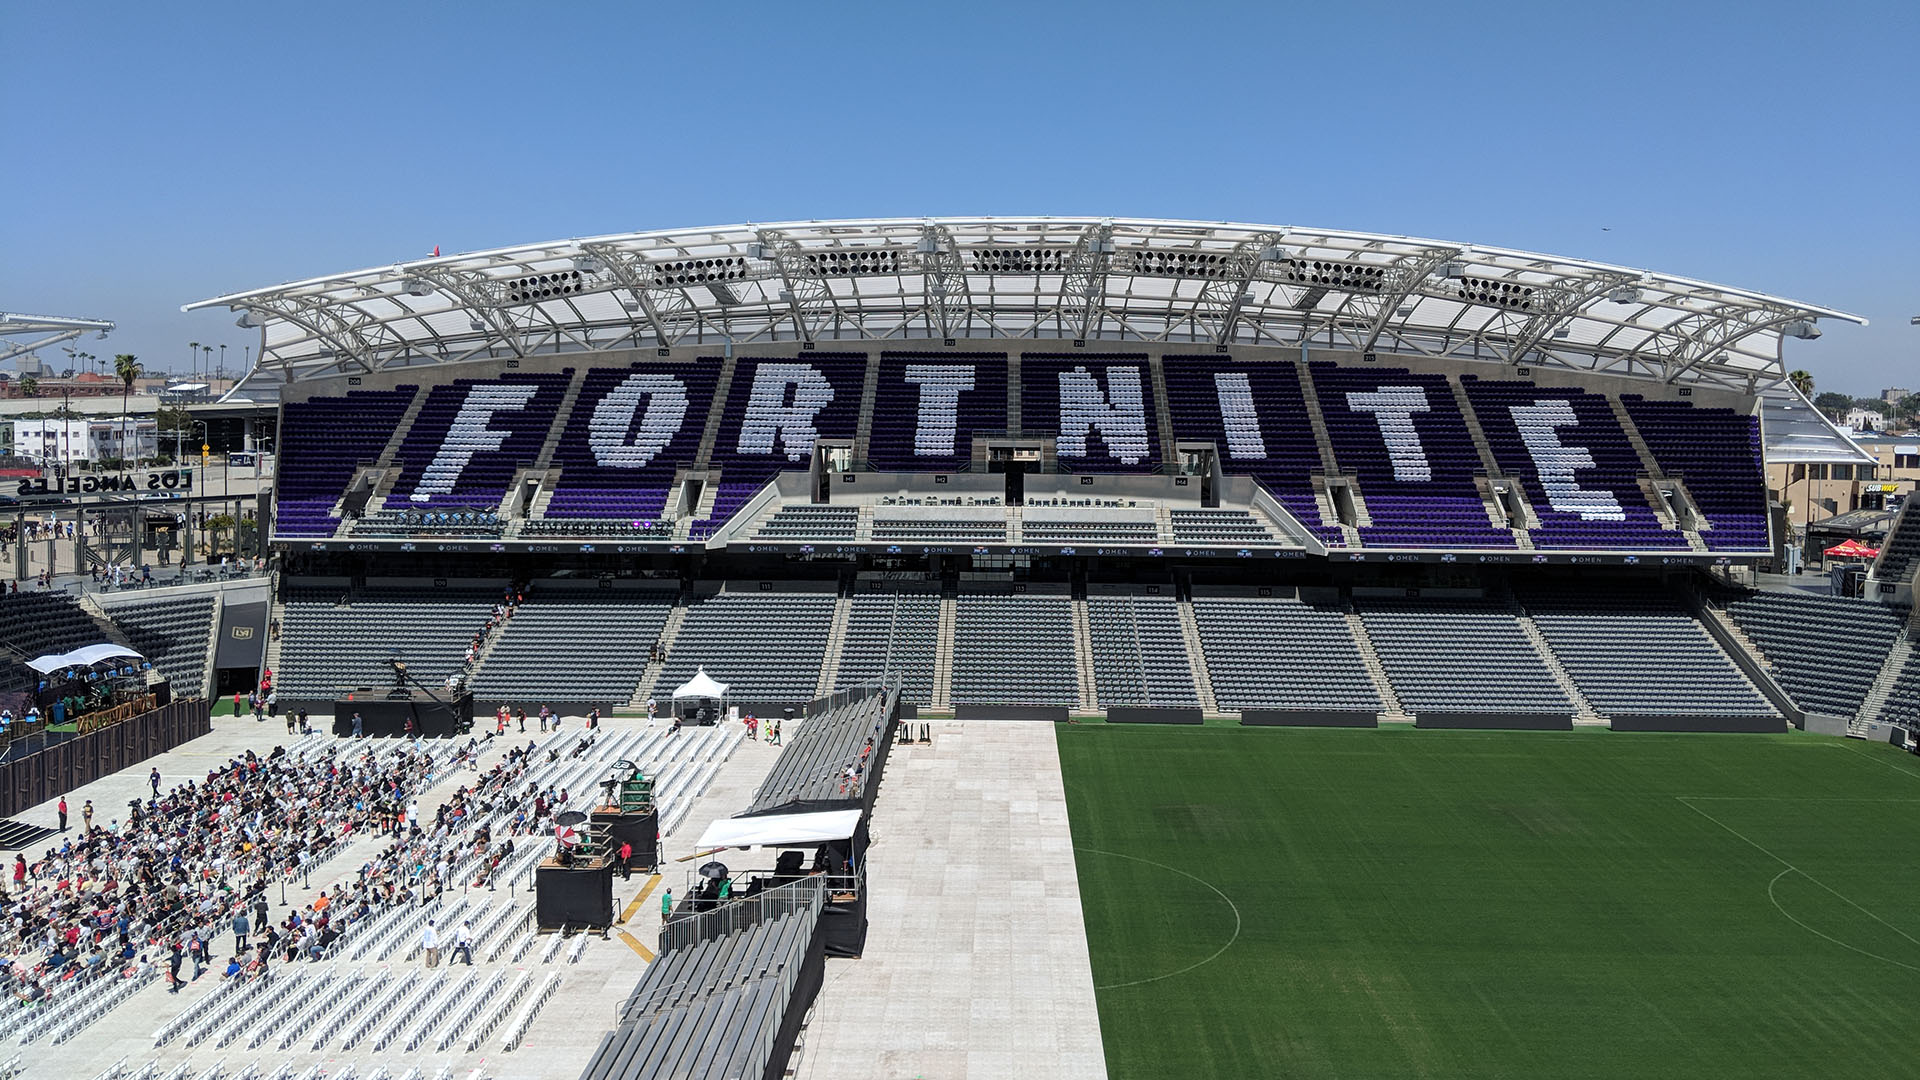 Being at the Fortnite ProAm Tournament gave me a glimpse at where E3